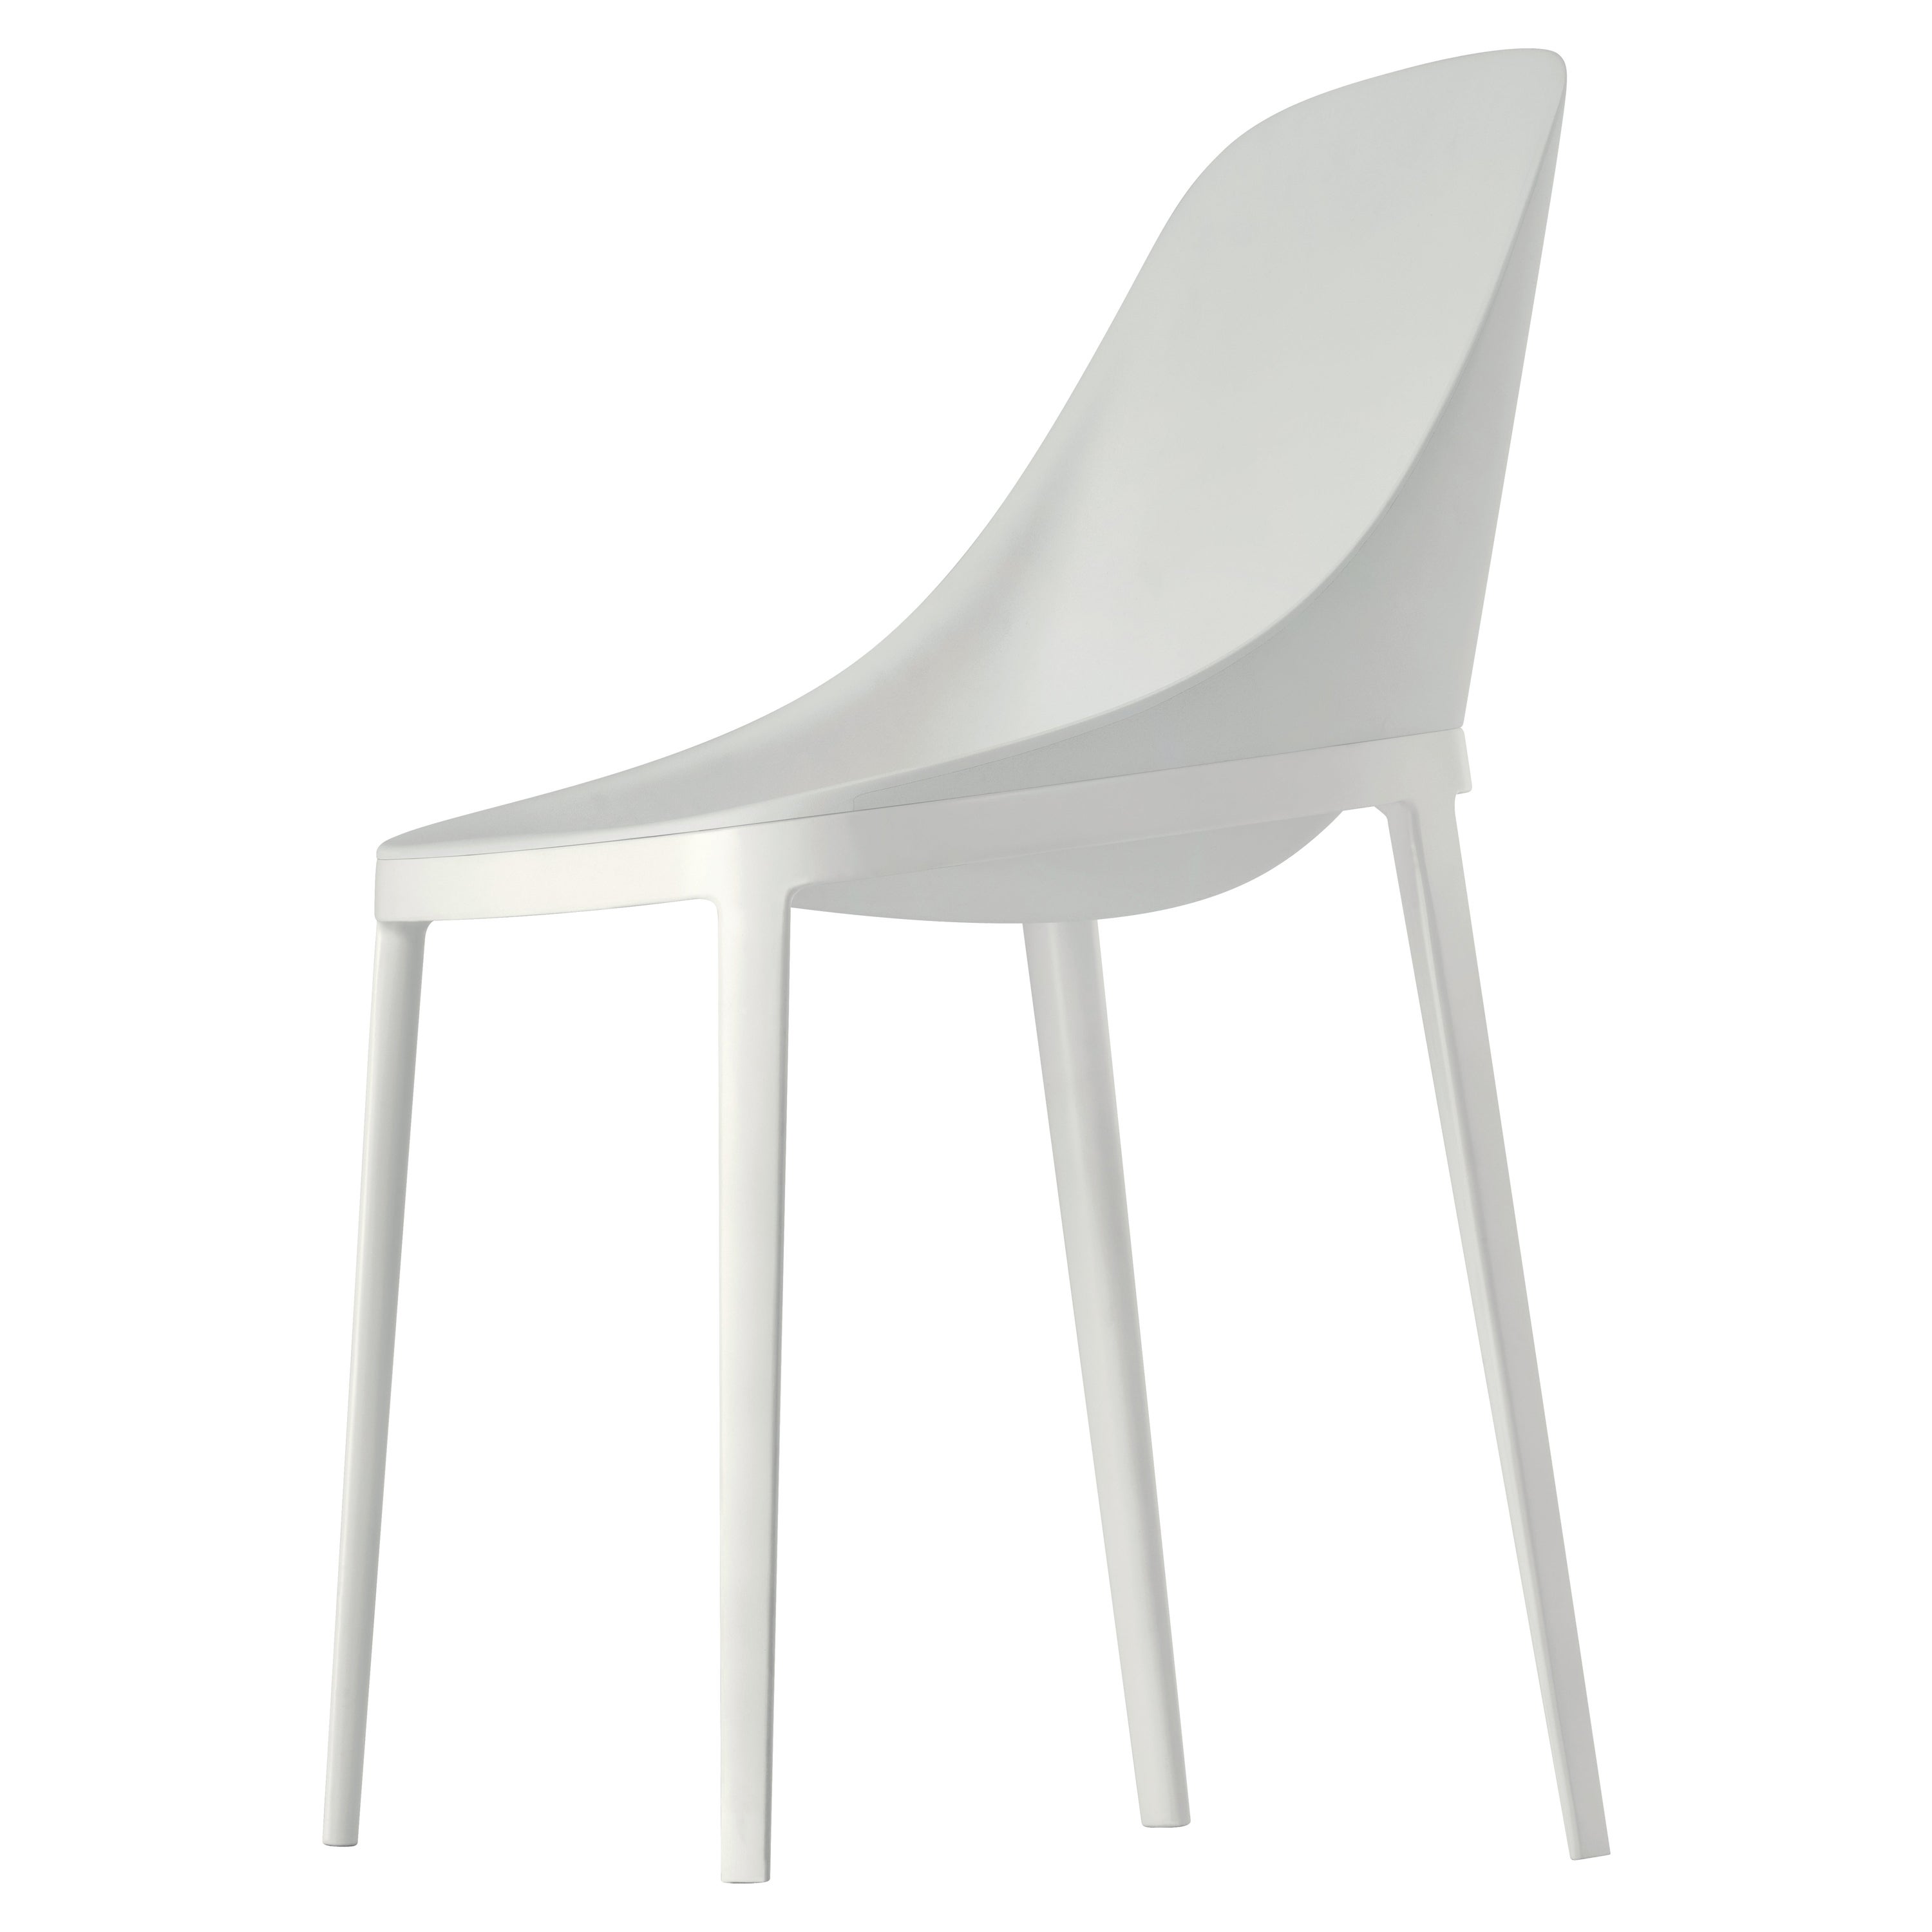 Alias 070 Elle Chair in White with Lacquered Aluminum Frame by Eugeni Quitllet For Sale